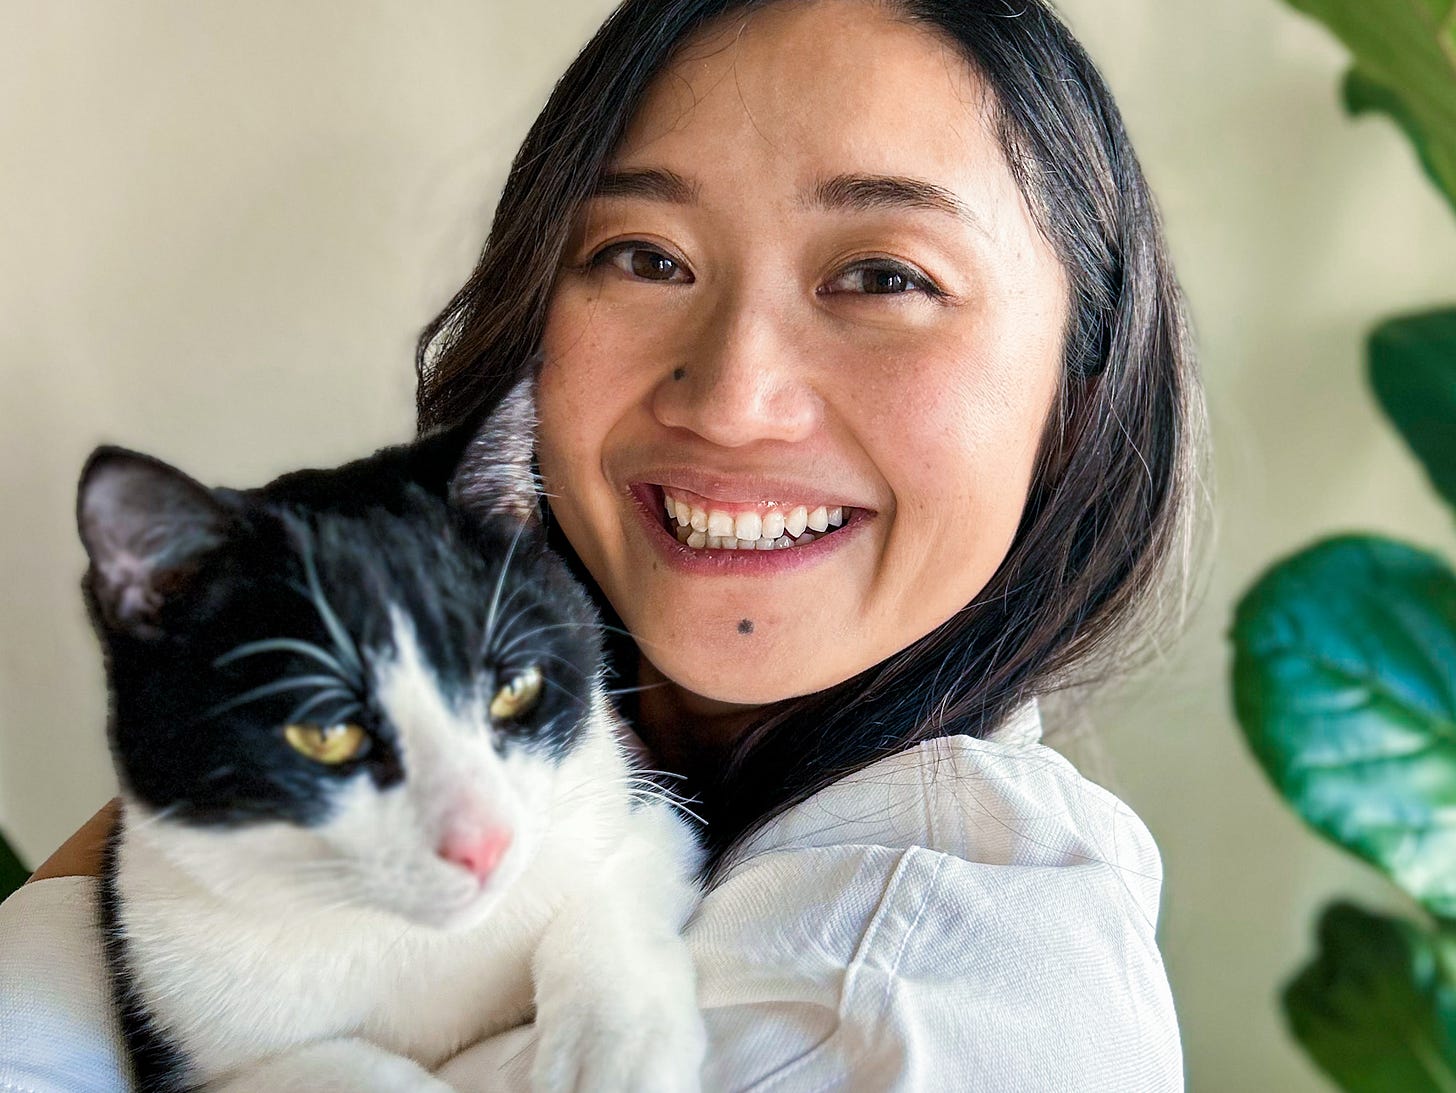 Woman with brown hair smiling and holding a cat